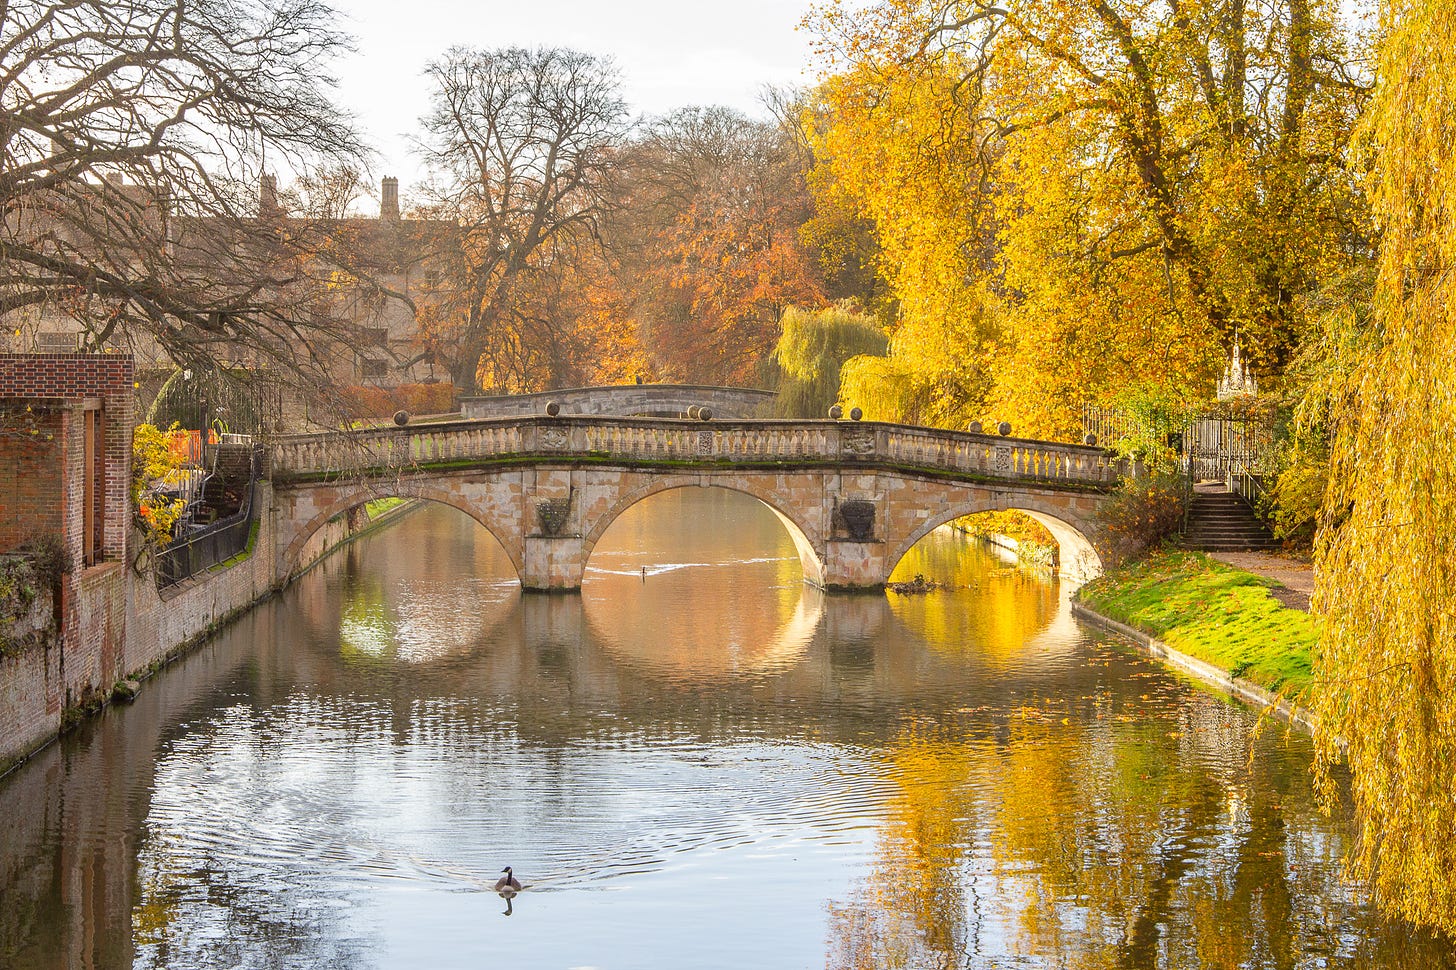 A goose swims along the river Cam in front of Clare College Bridge, surrounded by yellow autumn foliage.